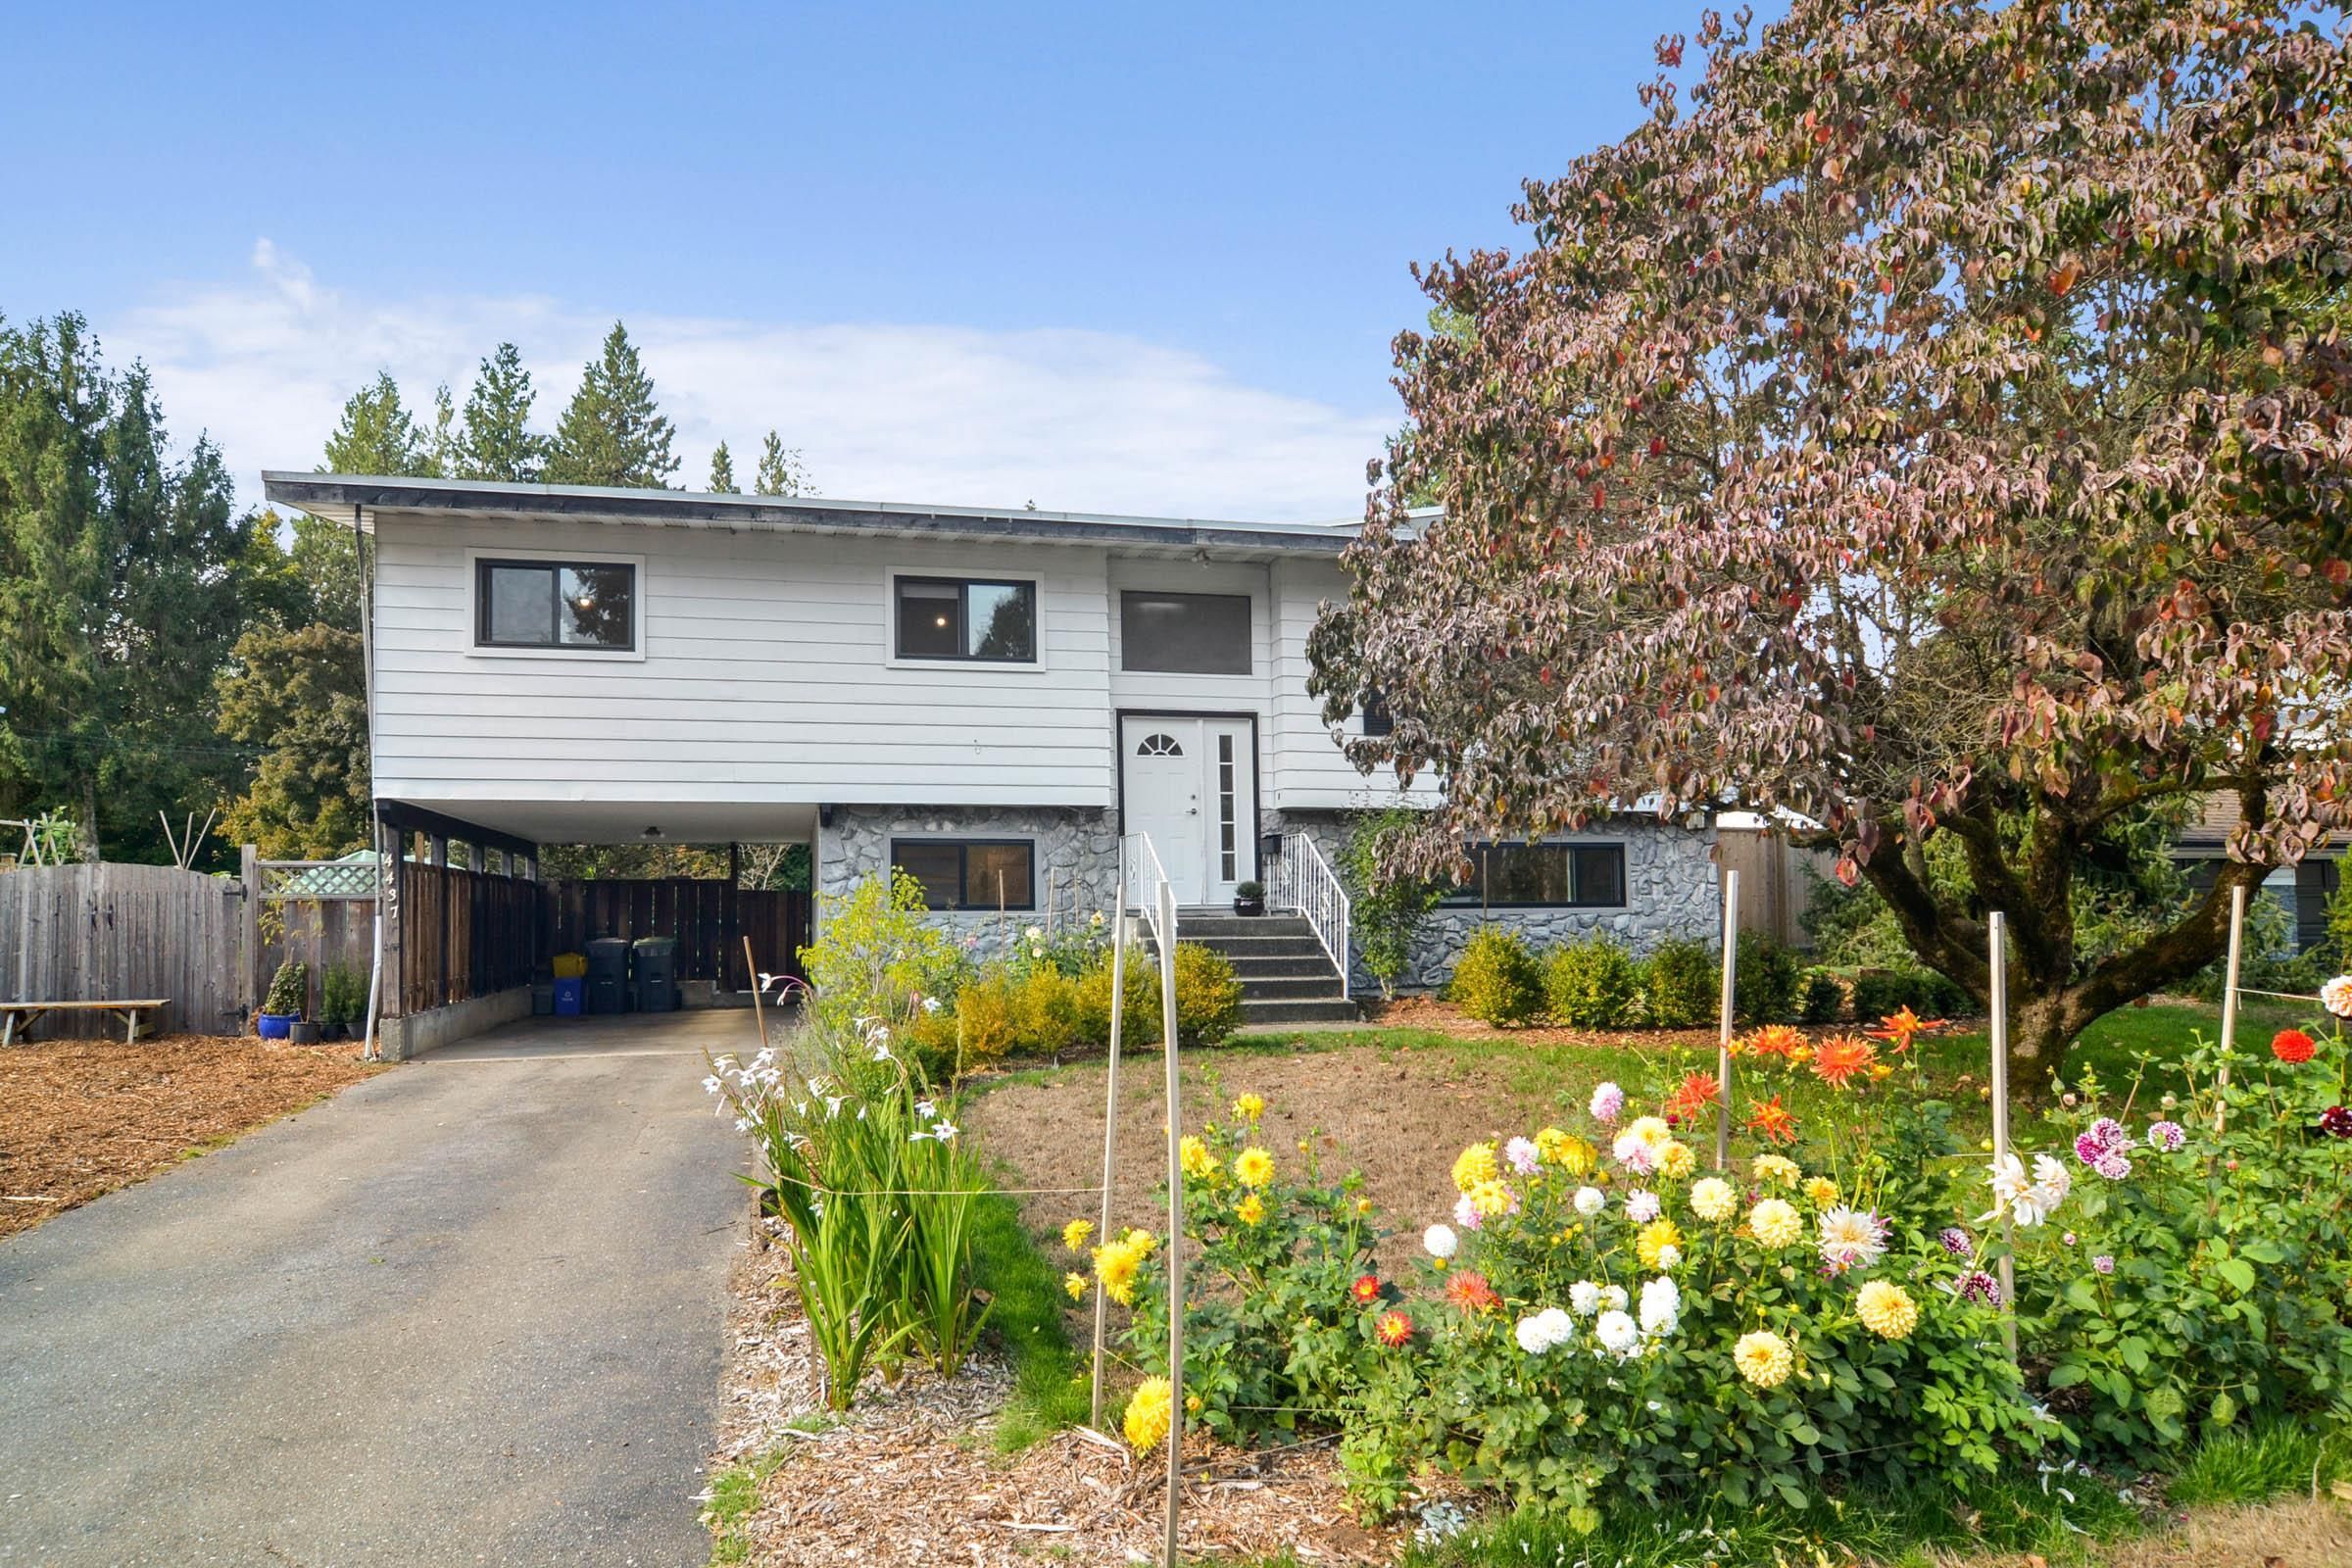 New property listed in Brookswood Langley, Langley